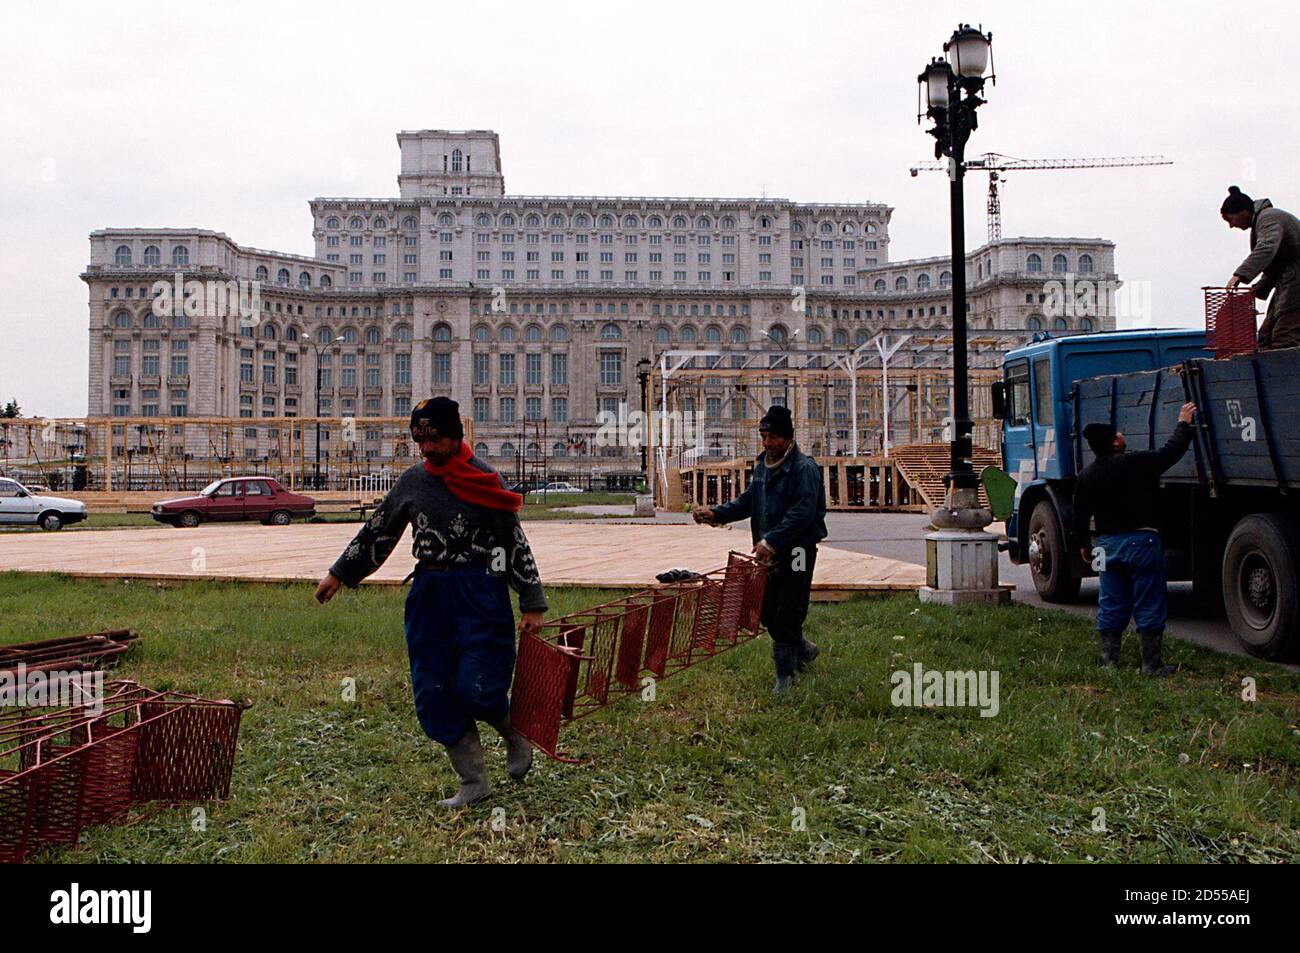 Romanian workers prepare the grounds of the vast marble palace erected by commnunist dictator Nicolae Ceausescu, for a Roman Catholic outdoor mass, in Bucharest May 6, one of the high points of Pope John Paul's visit to Romania. The pope's visit, the first ever to a mainly Orthodox country, is intended to improve relations between the Catholic and Orthodox church, split since the 11th century.  BC/WS Stock Photo